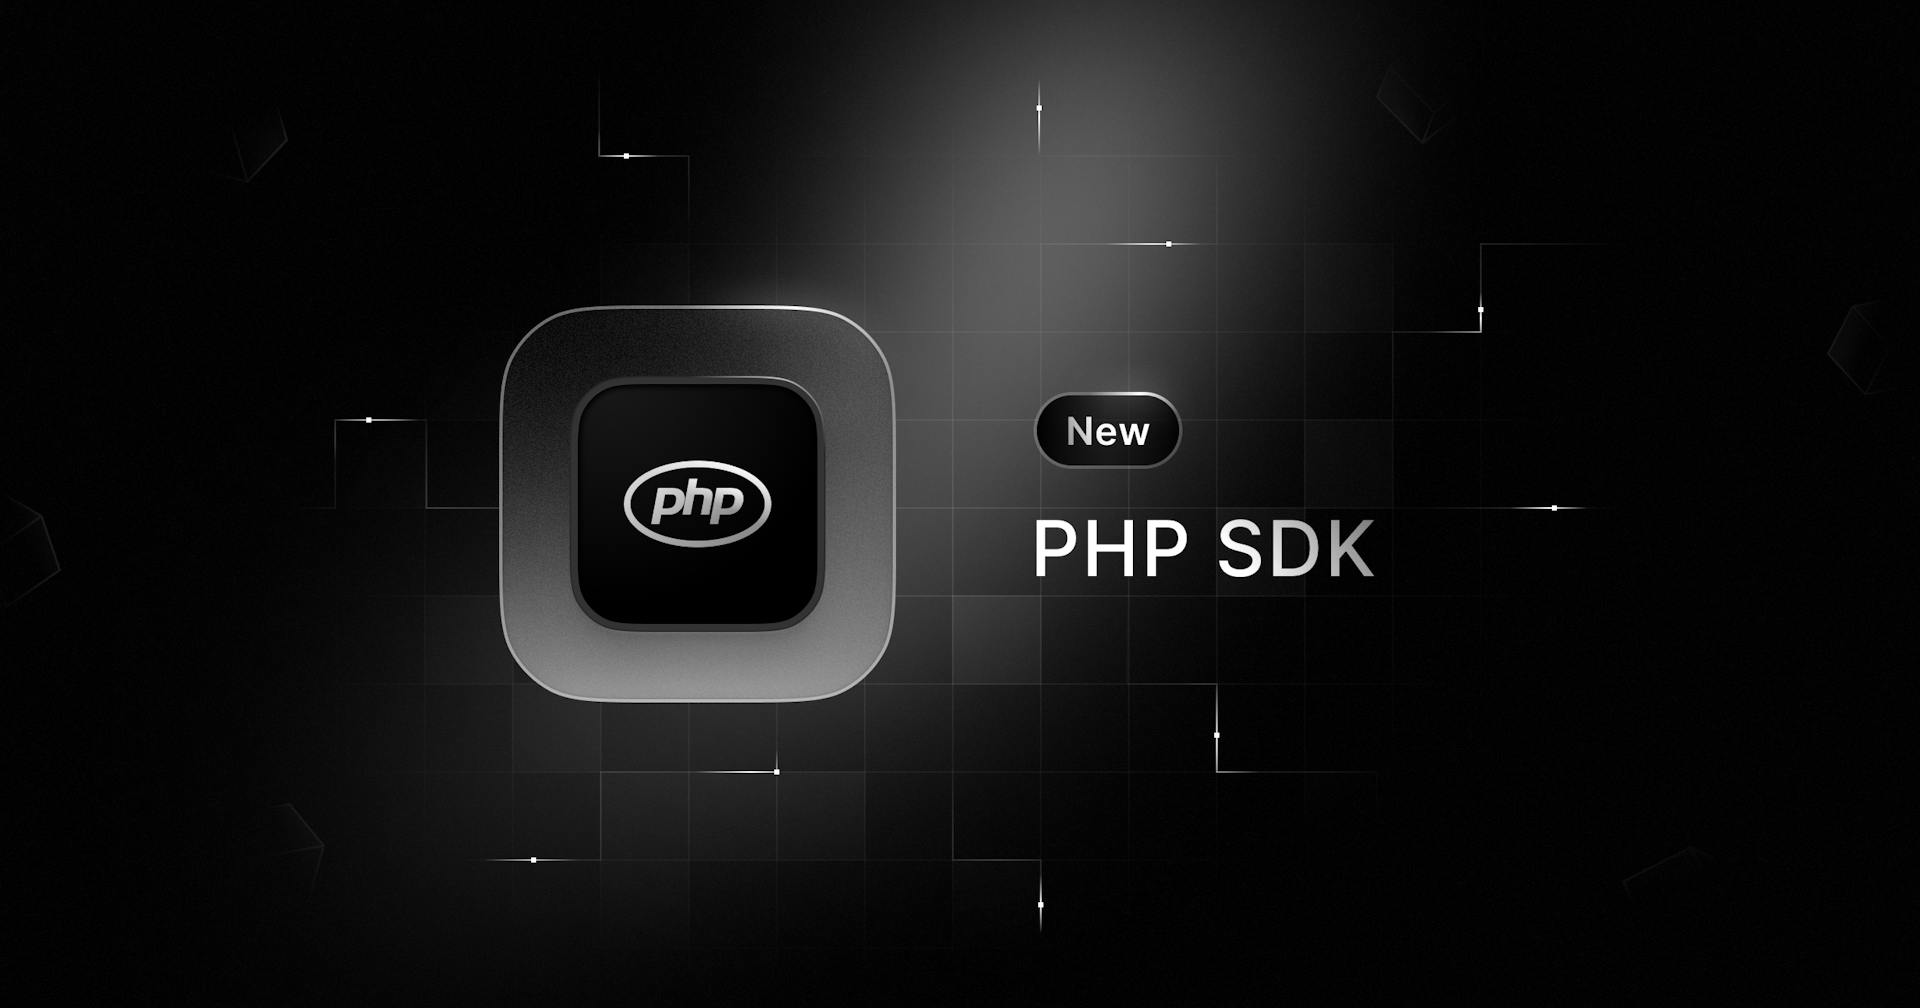 Announcing the PHP SDK